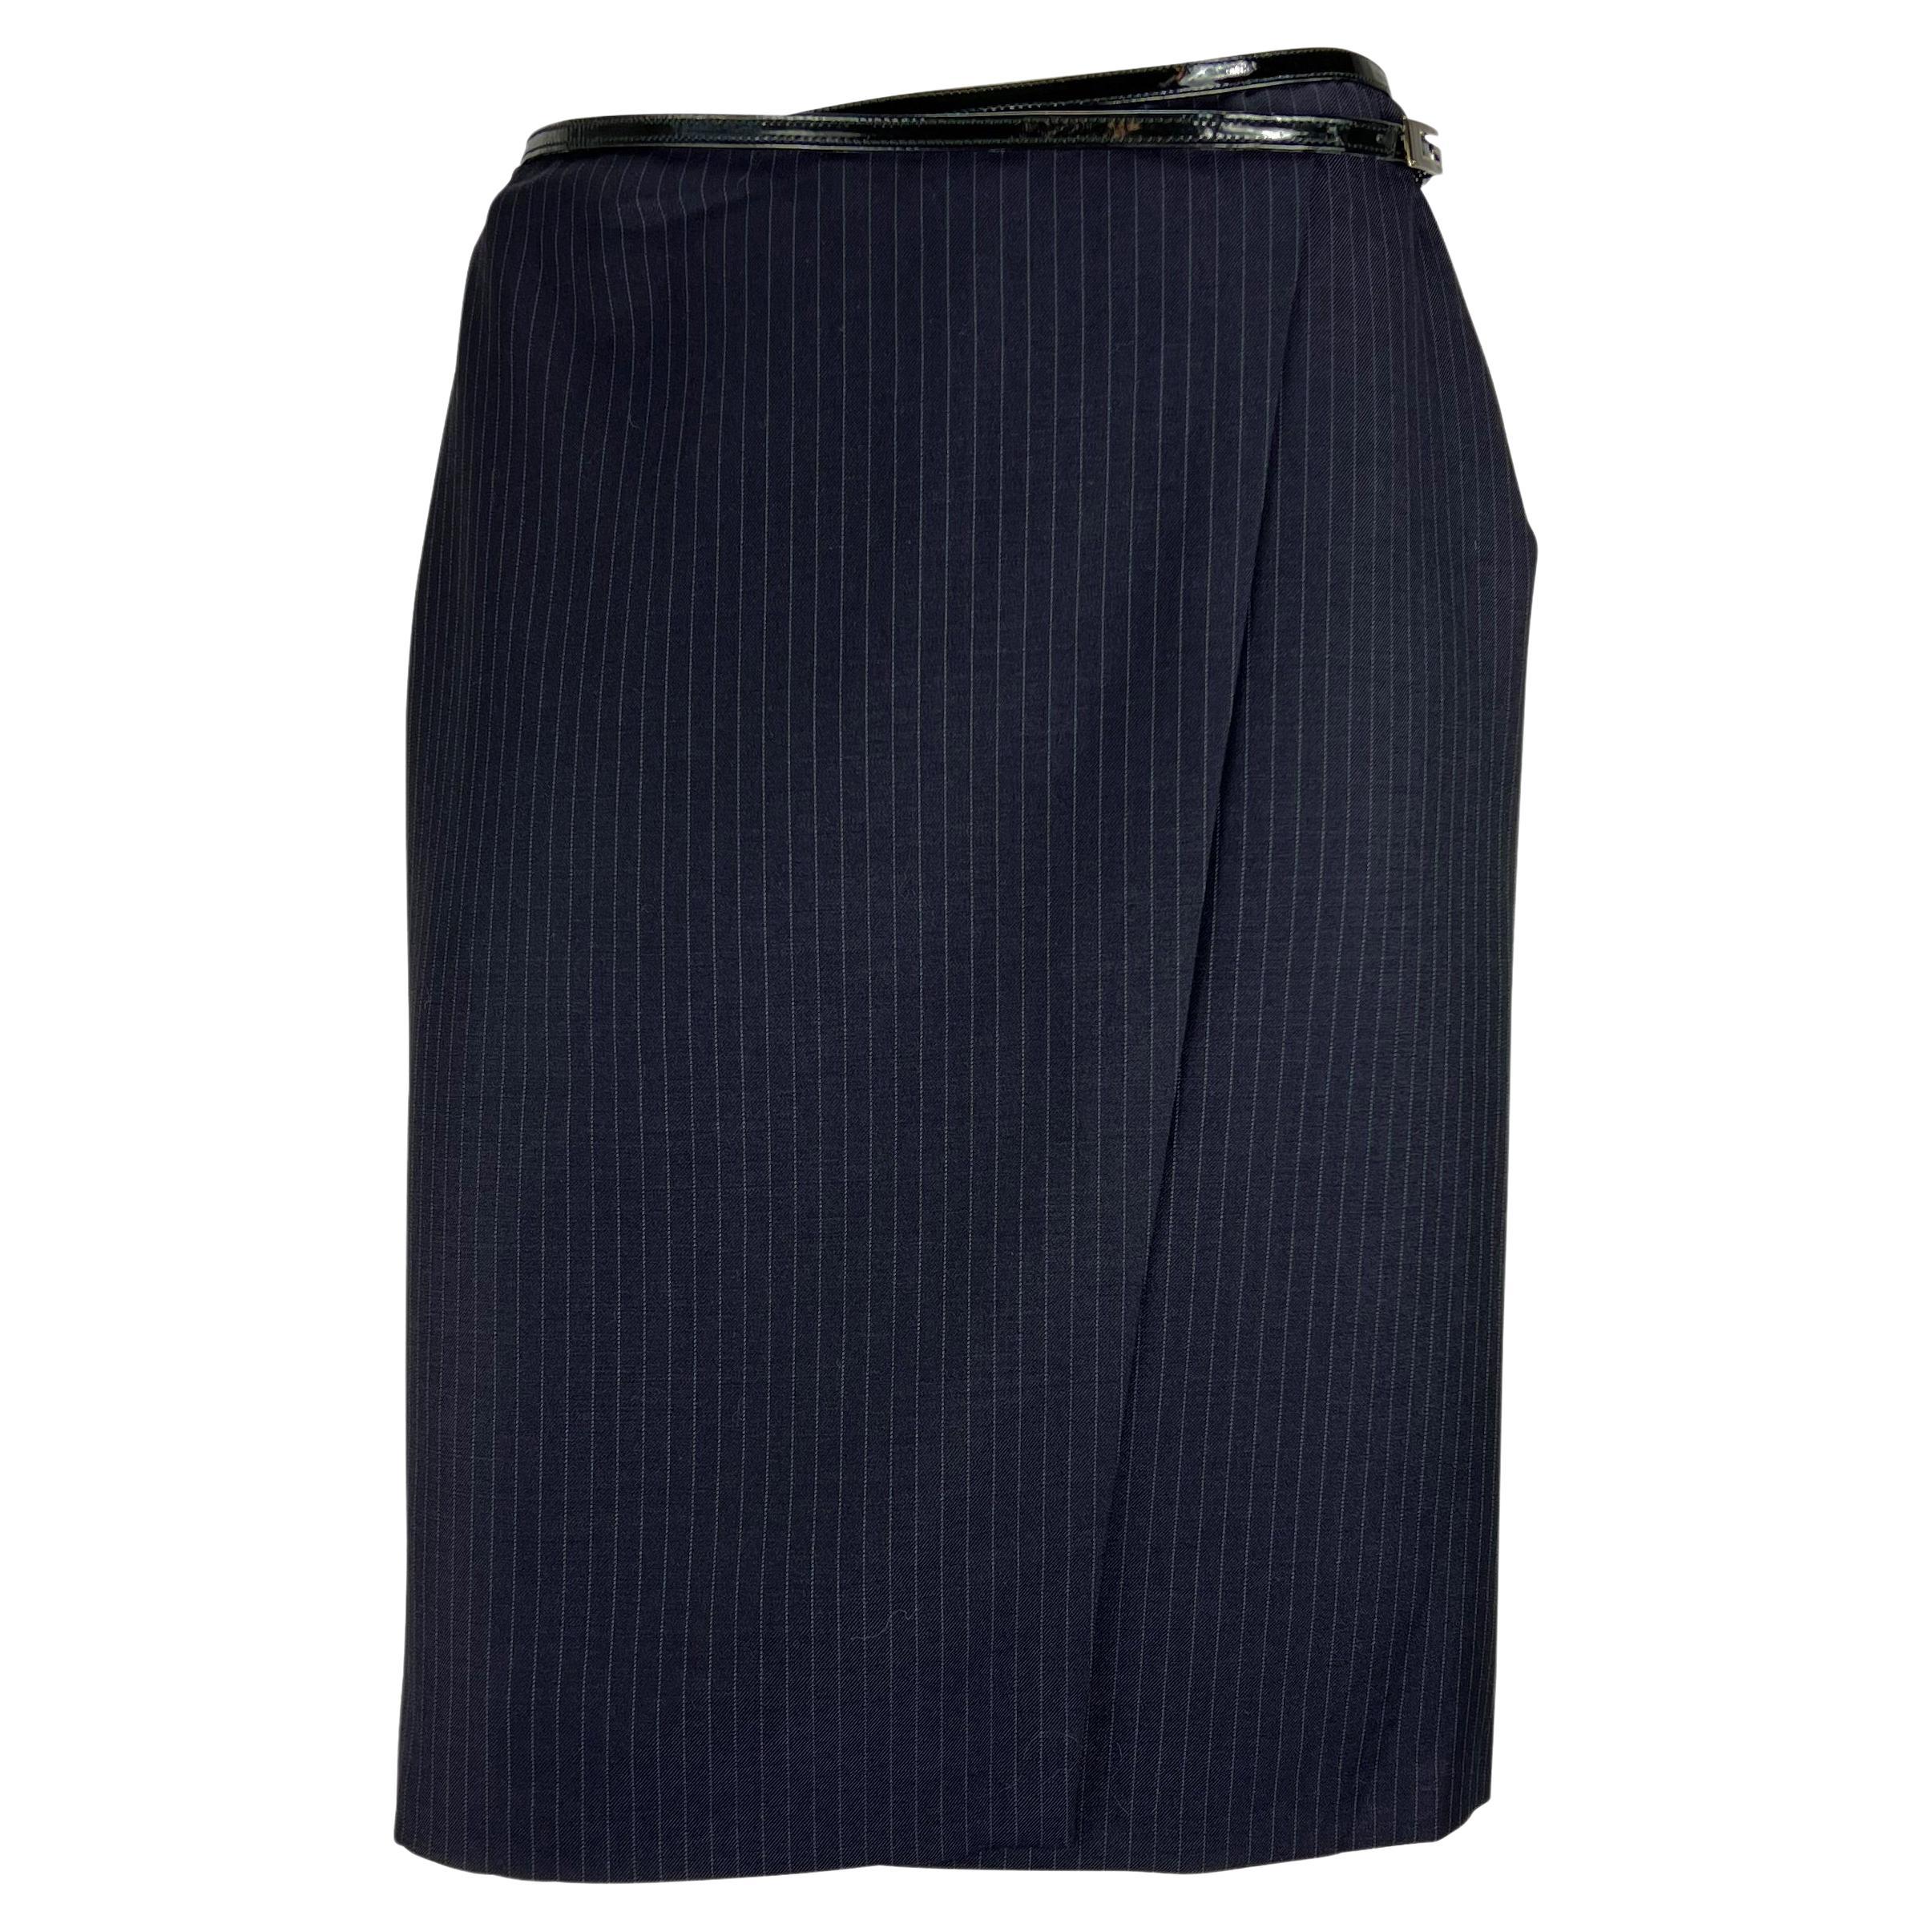 F/W 1997 Gucci by Tom Ford Runway Patent G Buckle Navy Pinstripe Wrap Skirt 5